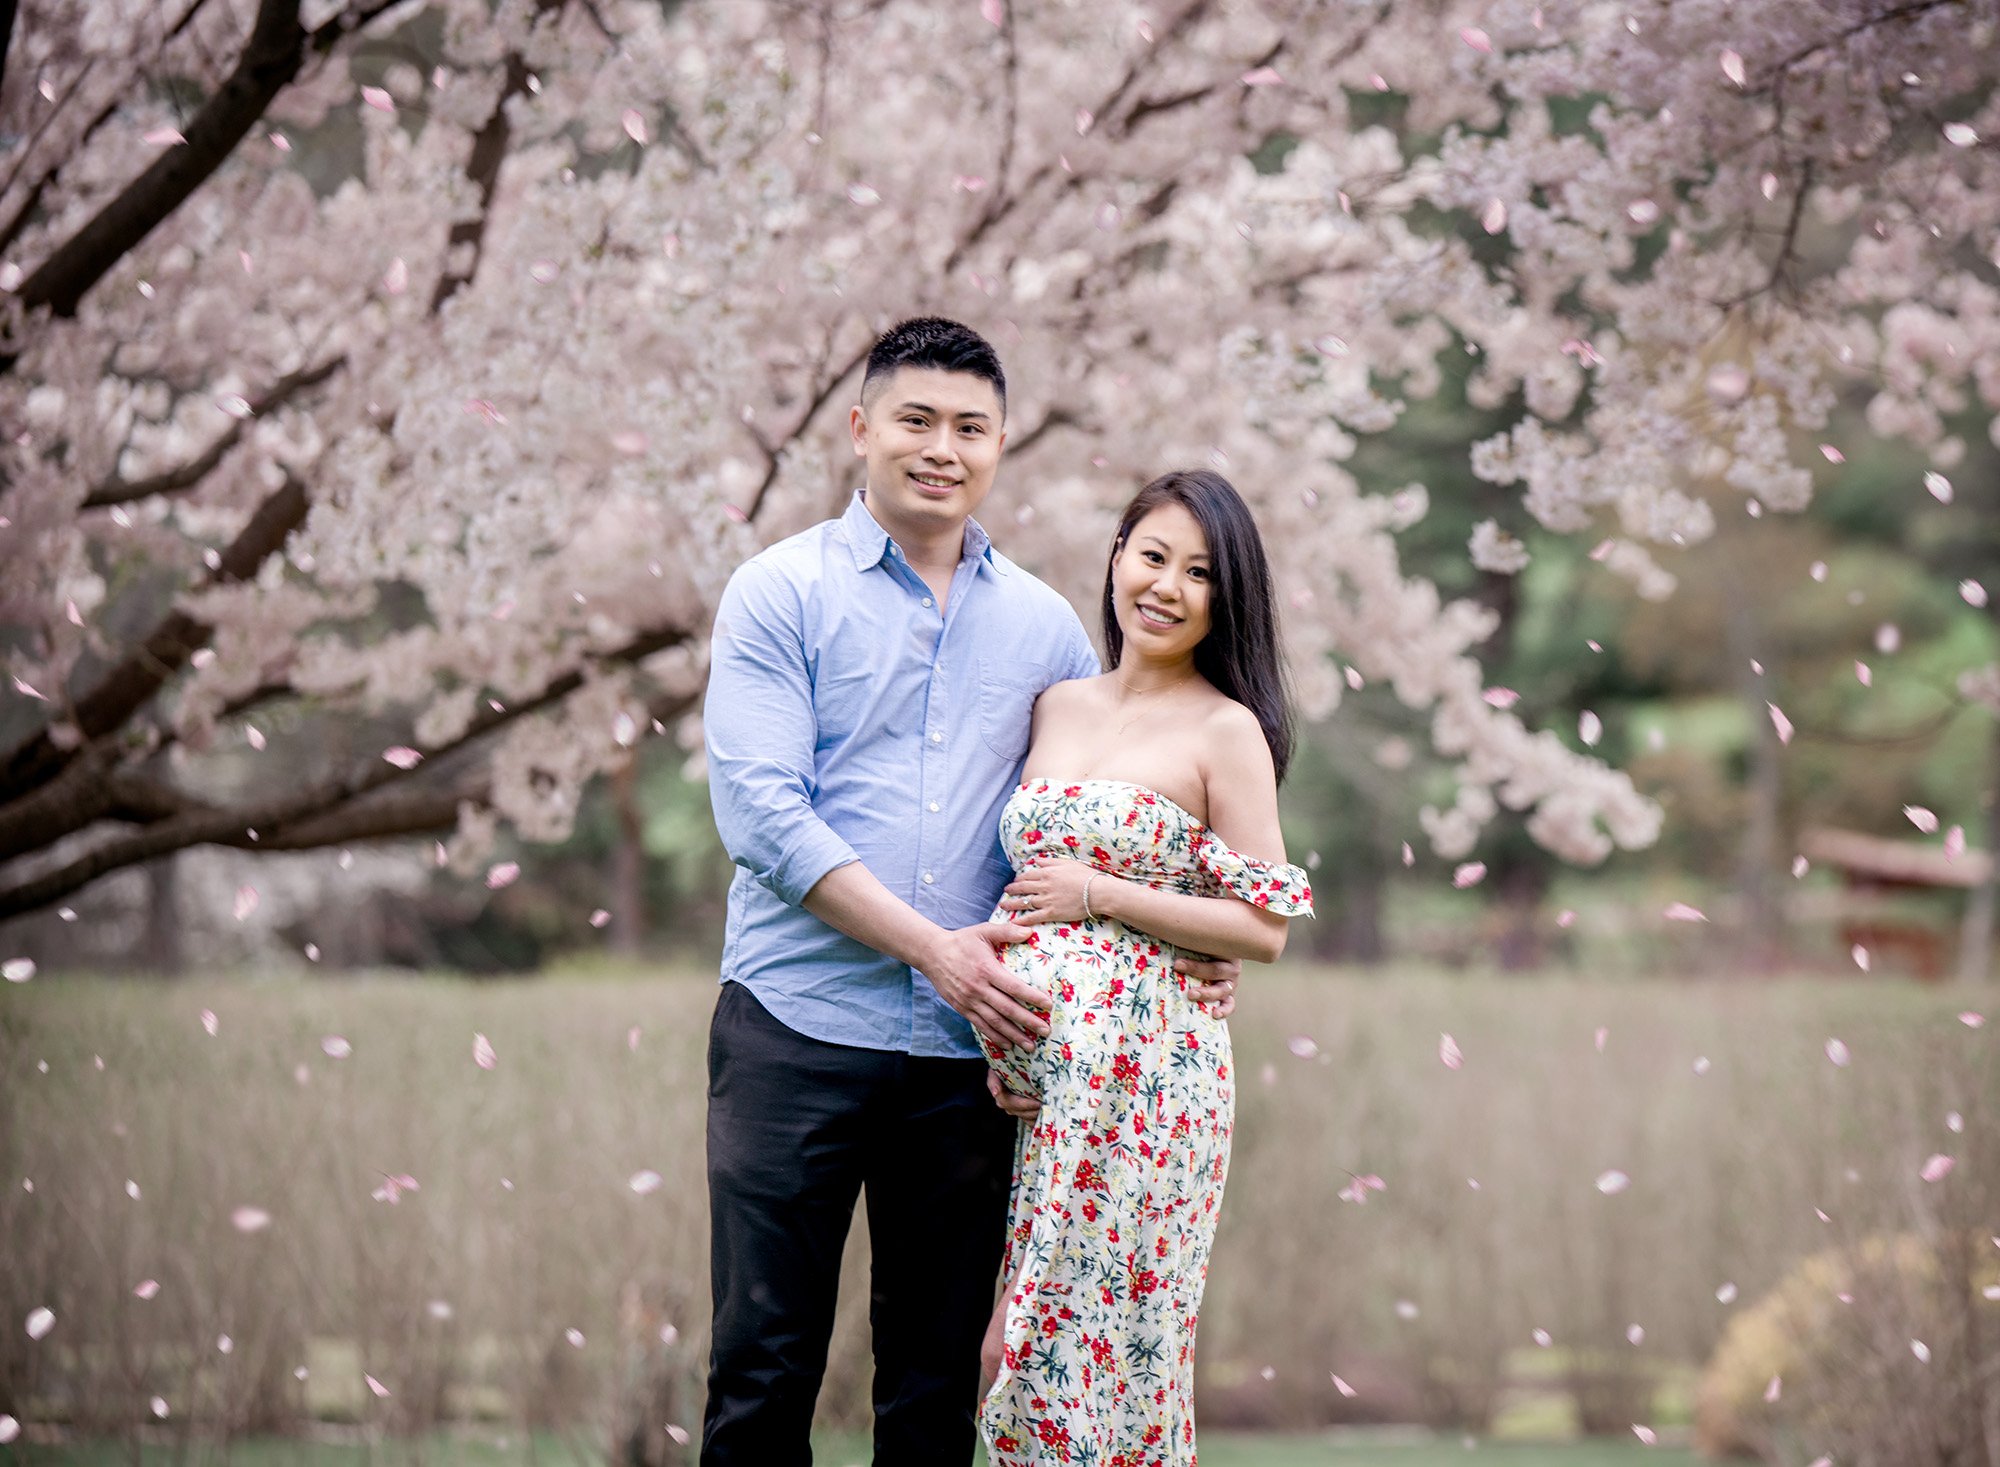 Spring Maternity Photos in Manchester CT pregnant woman in floral maternity dress posing with partner under a weeping cherry tree while petals are falling